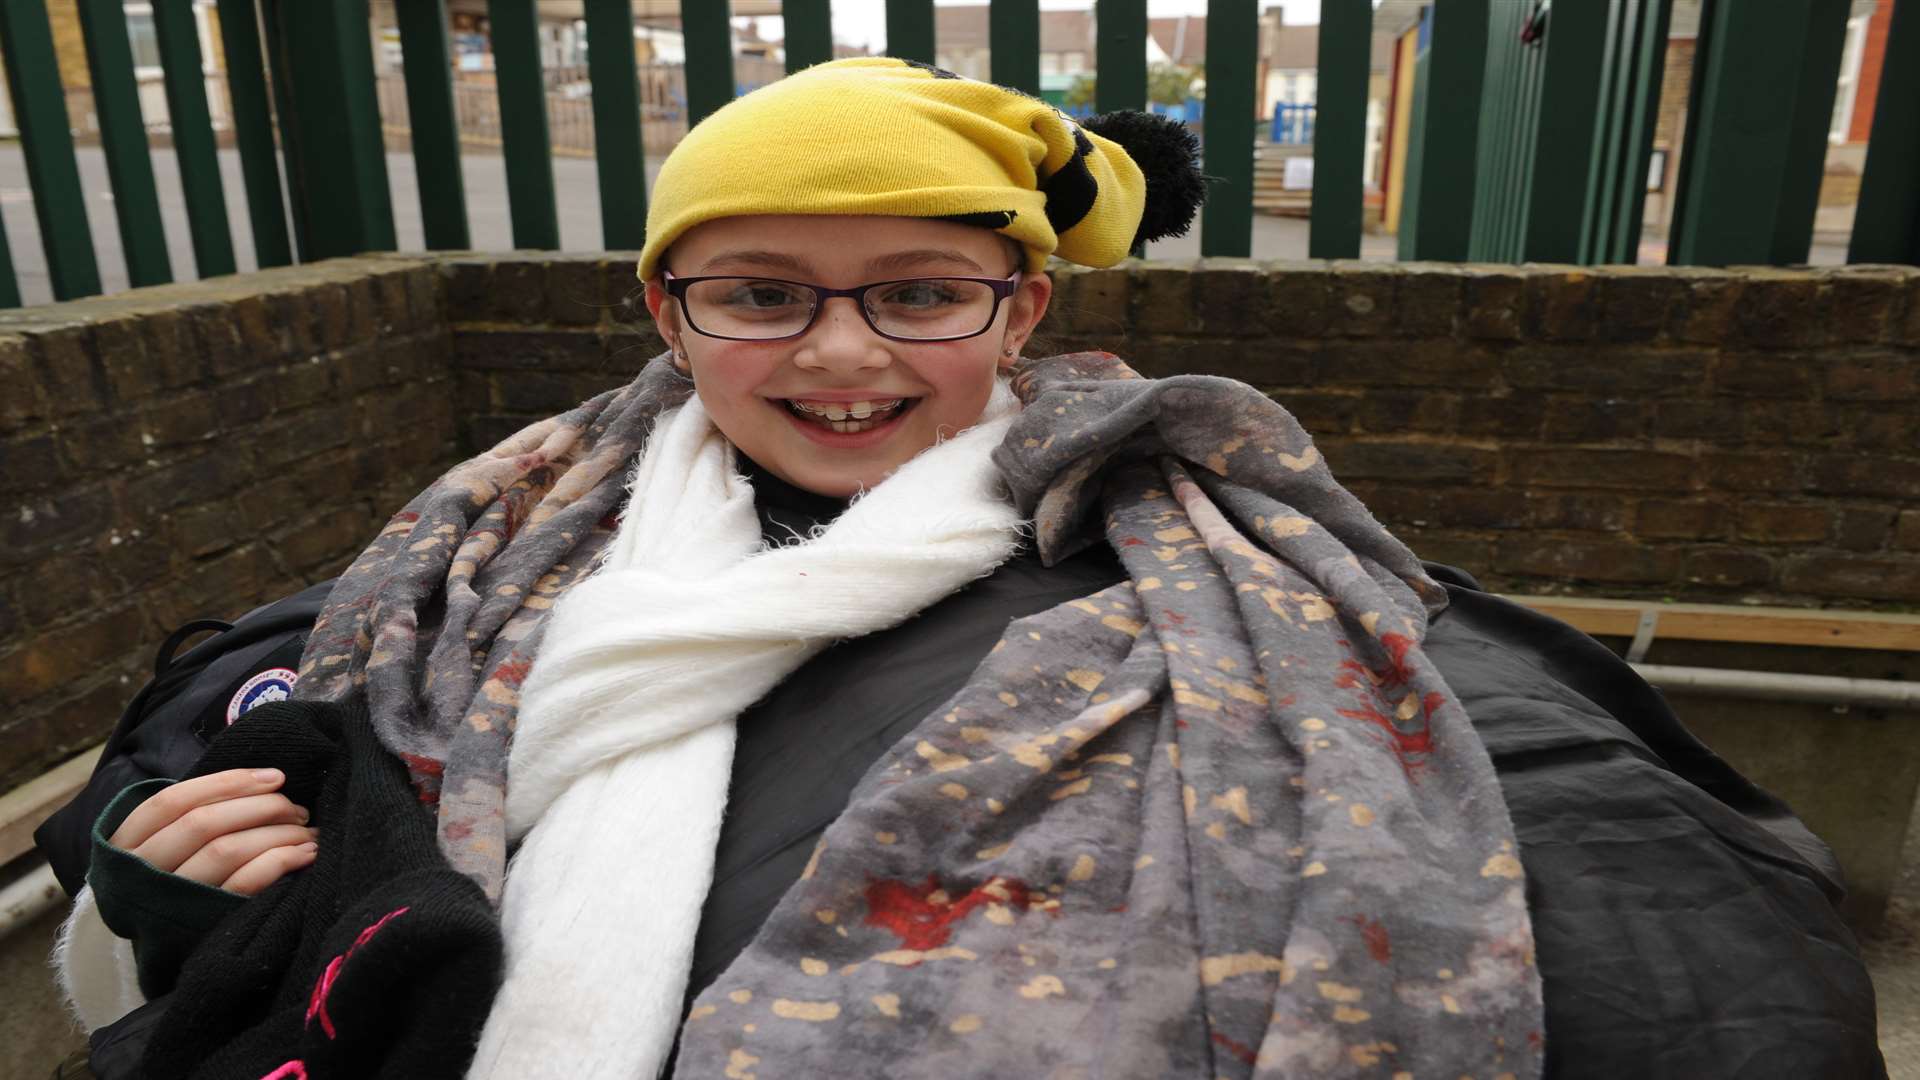 Libby Pearson has been collecting clothes and blankets for the homeless